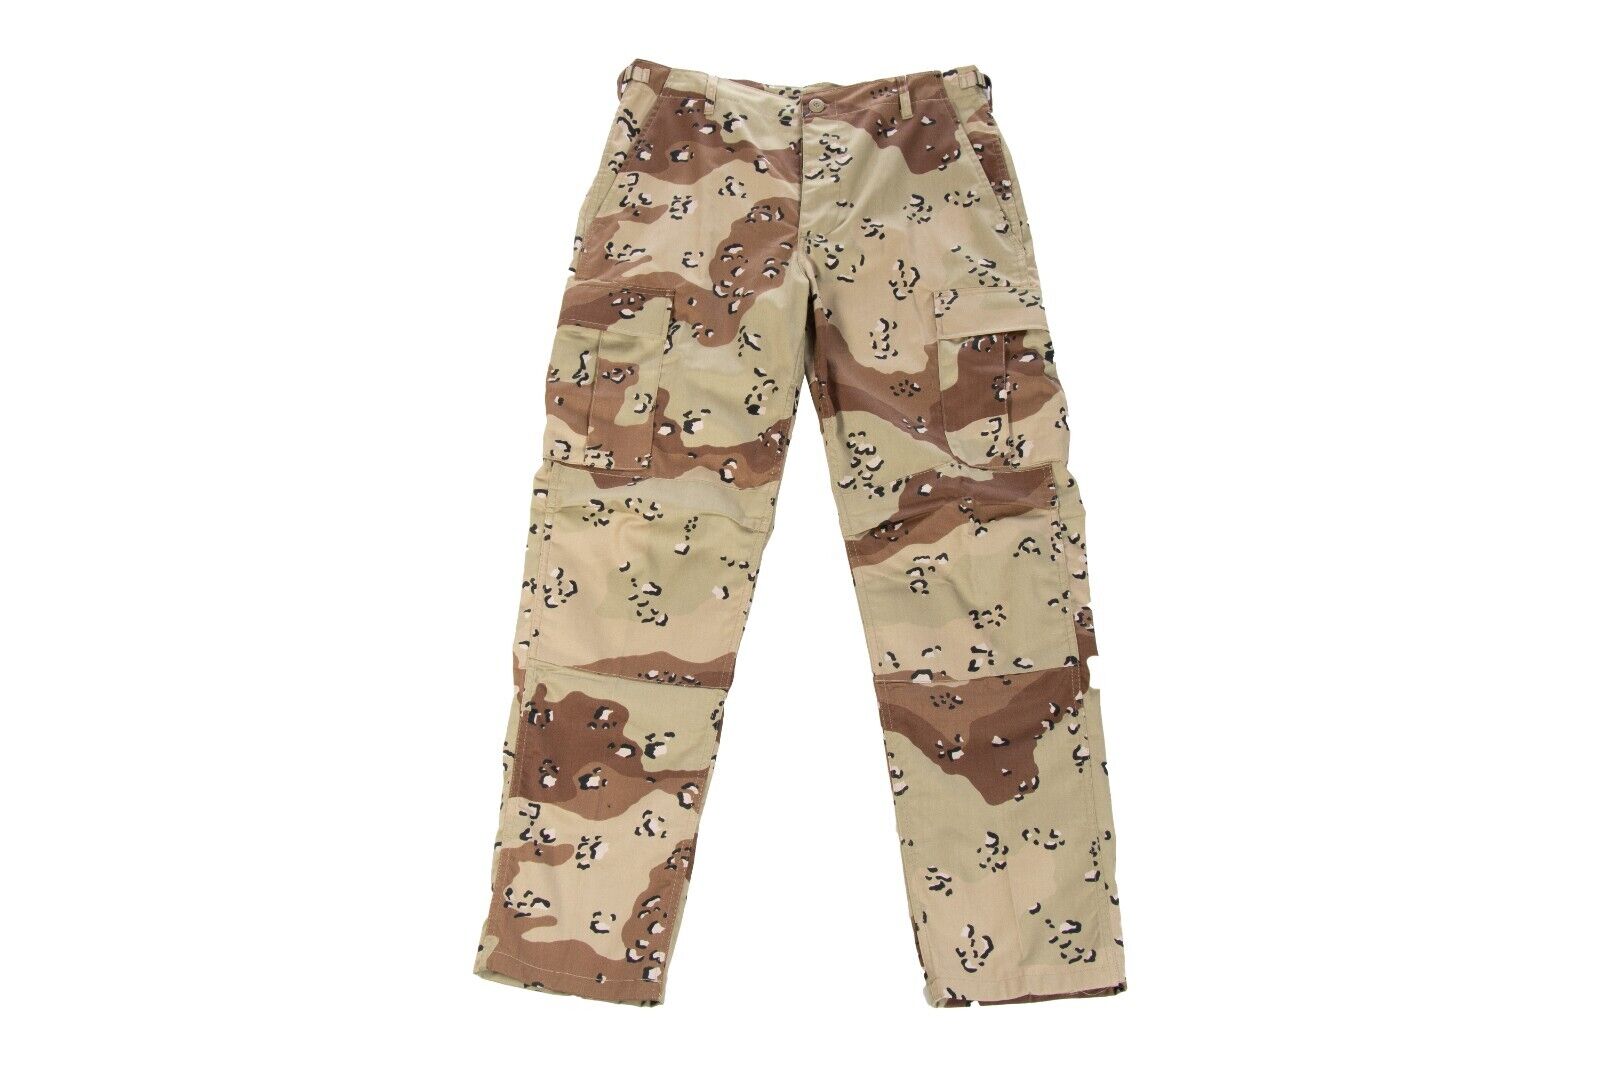 US Army Style Desert Storm Pants Trousers Chocolate Chip Camo Combat Trouser